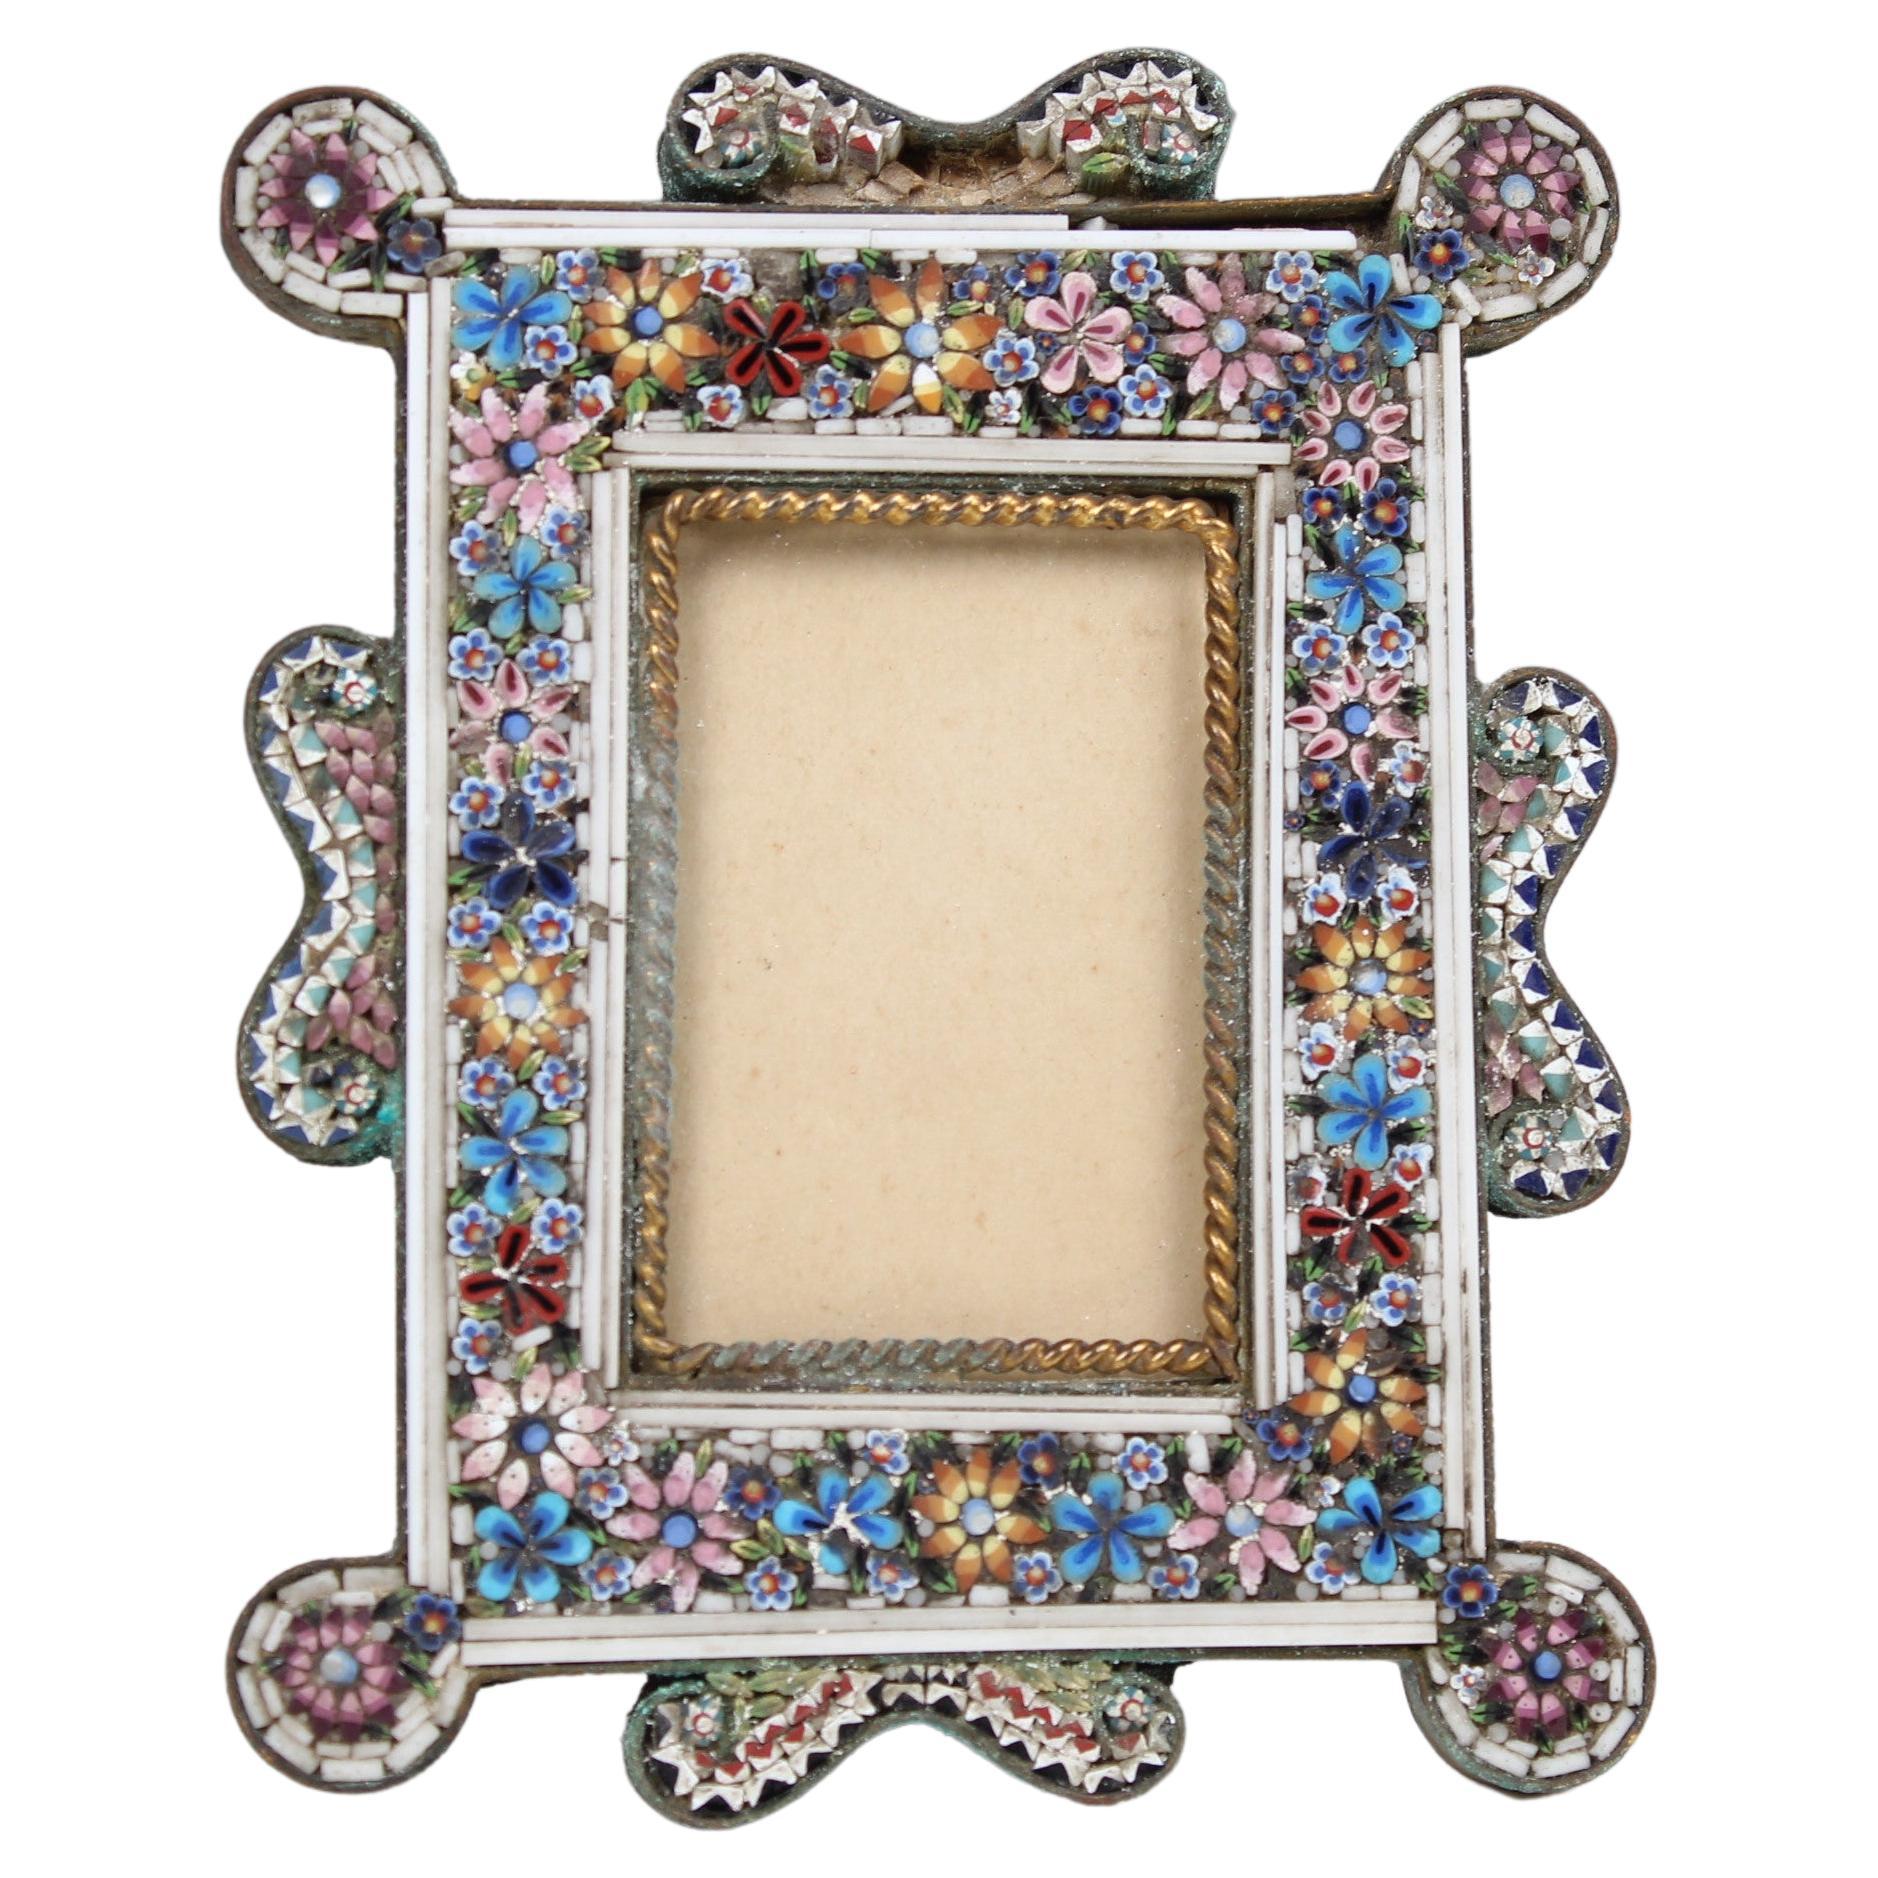 https://a.1stdibscdn.com/antique-small-picture-frame-stone-inserts-france-3-x-5-cm-for-sale/f_54192/f_354229221690463274948/f_35422922_1690463275776_bg_processed.jpg